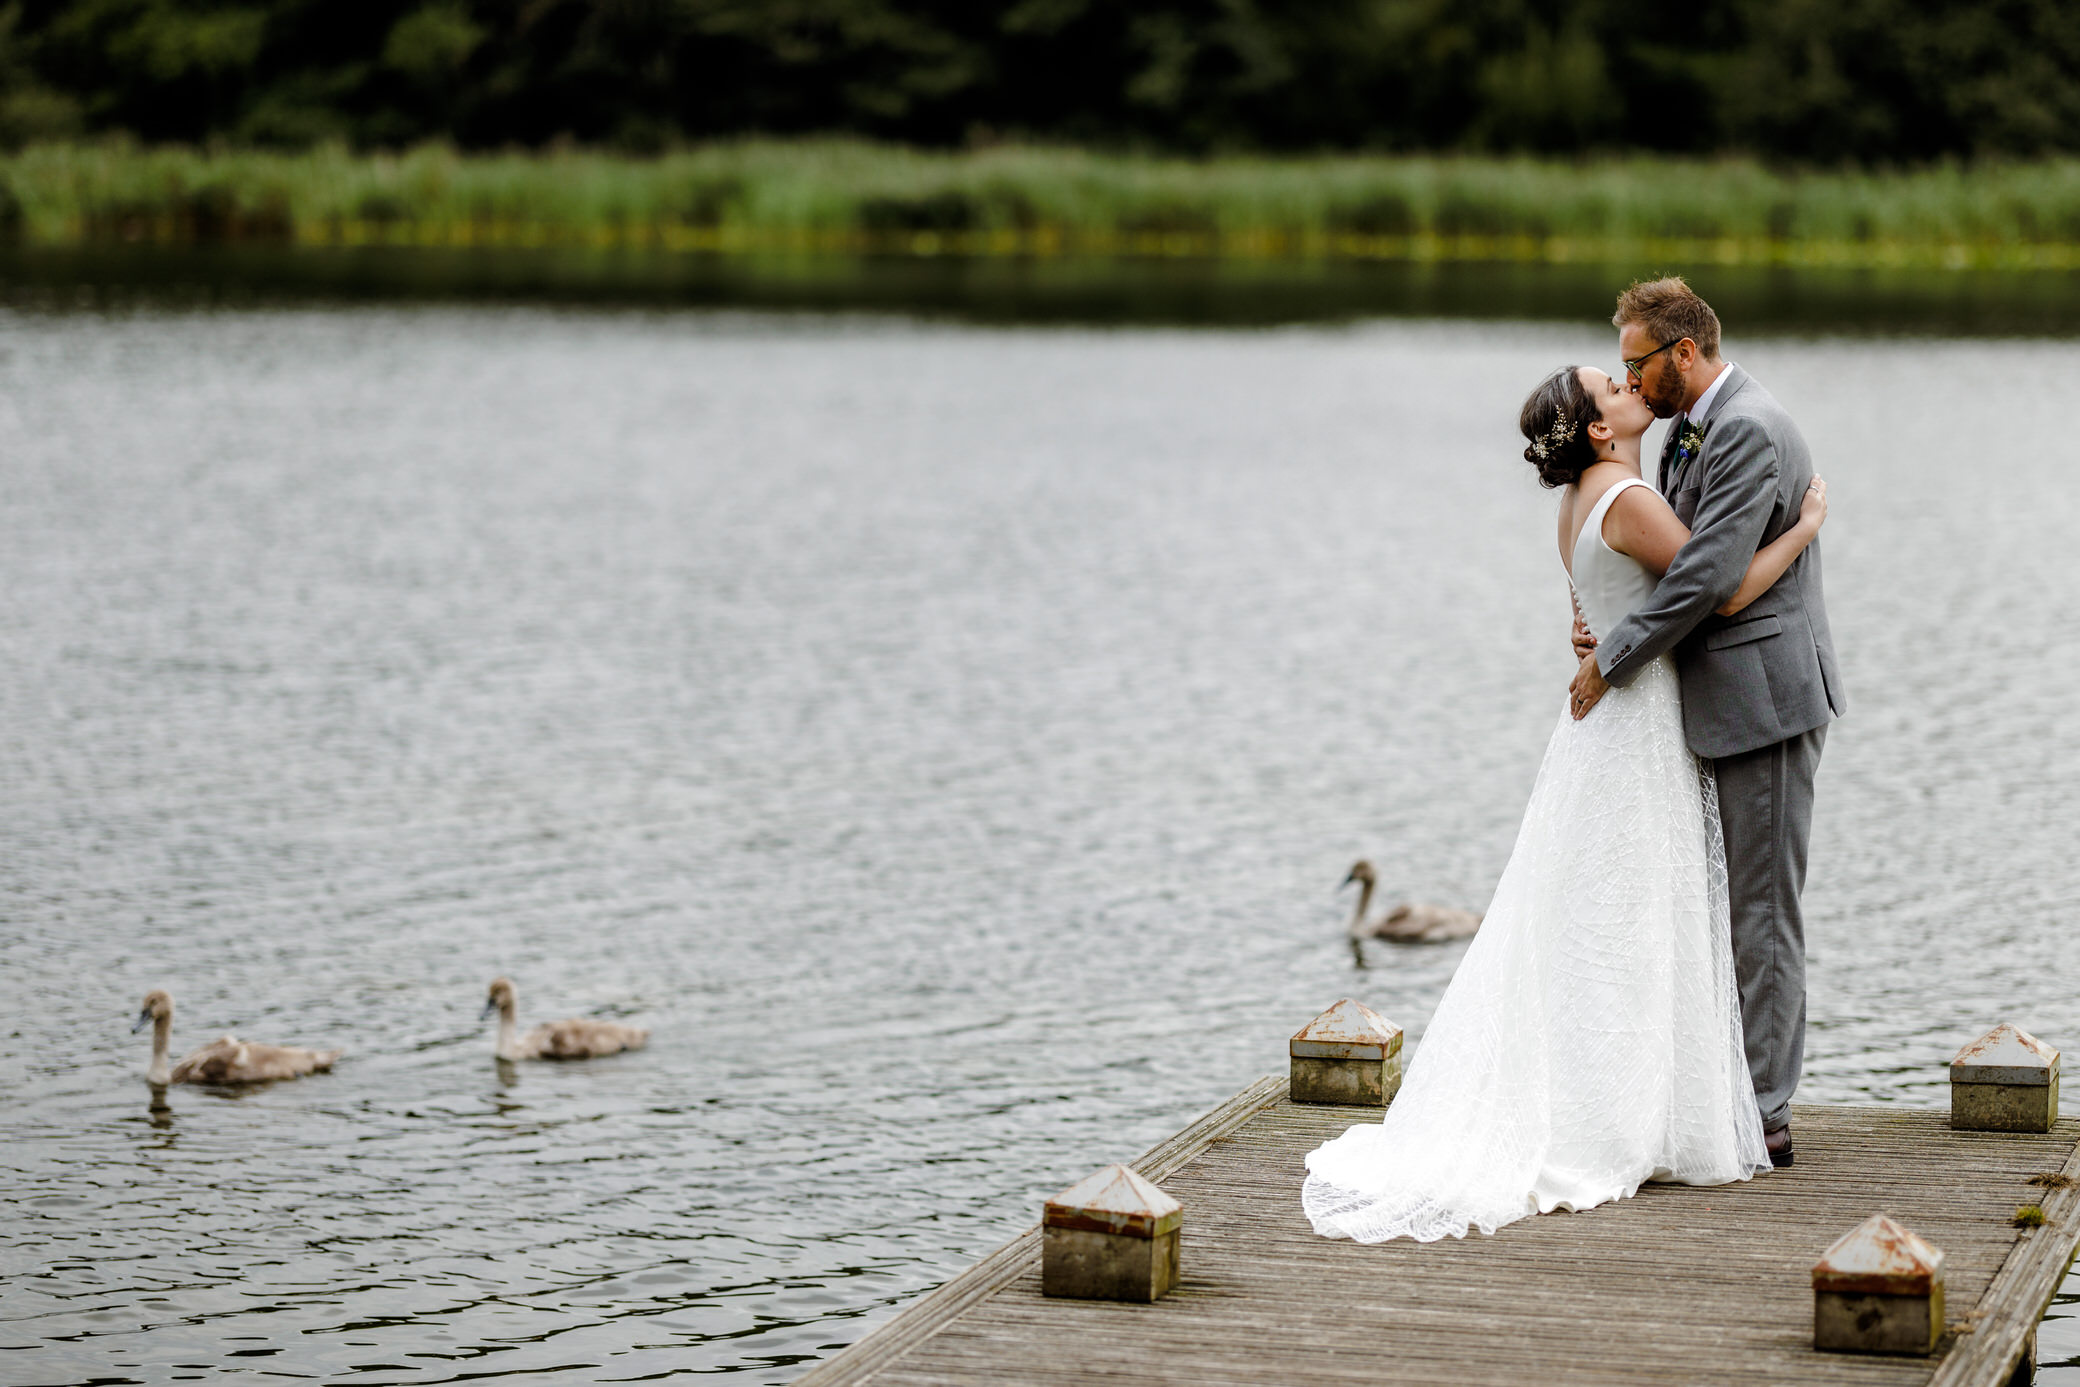 Hensol Castle Wedding - Bride and Groom at the lake